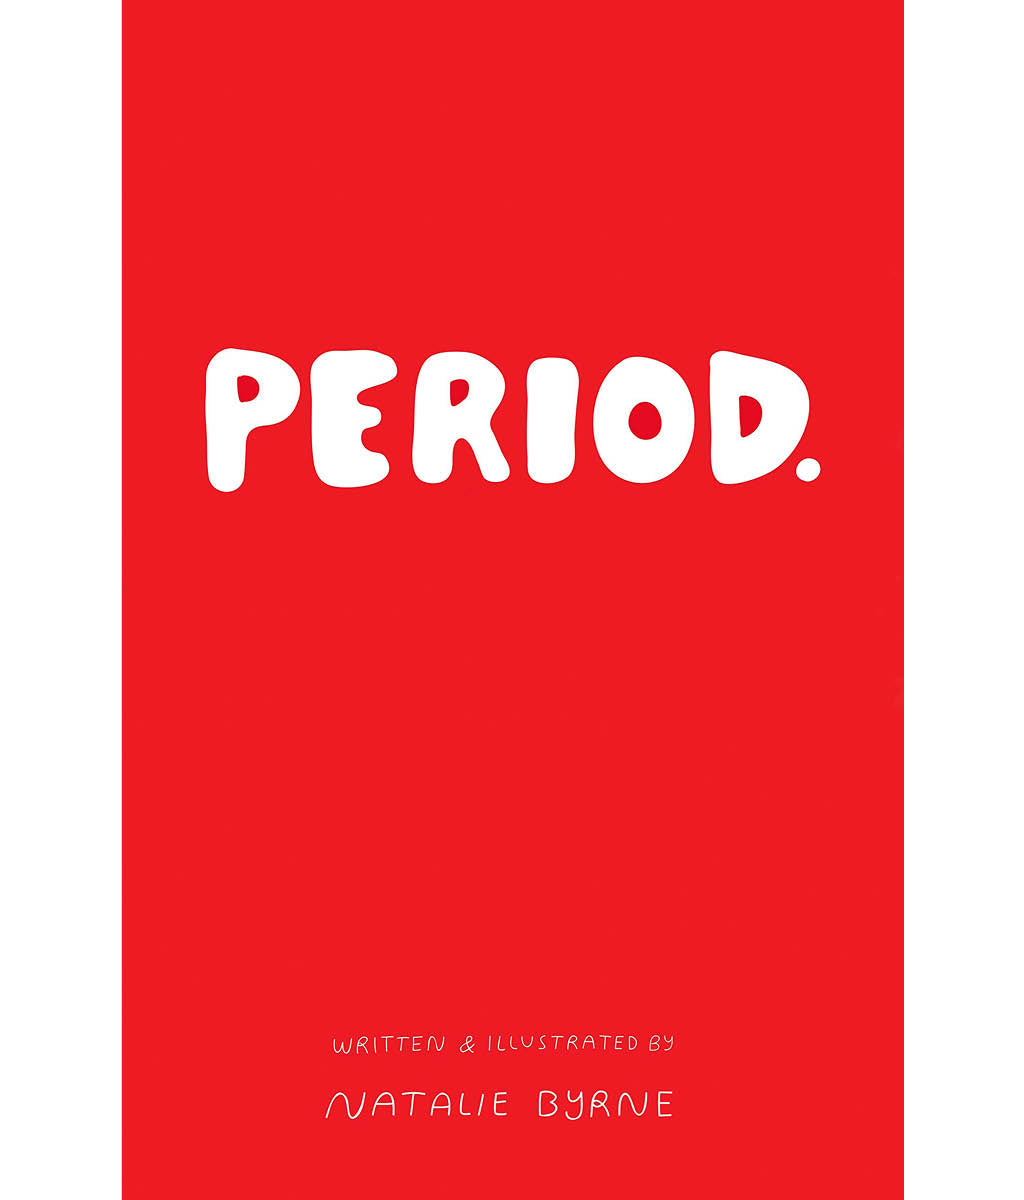 Period: Everything you need to know about periods Natalie Byrne